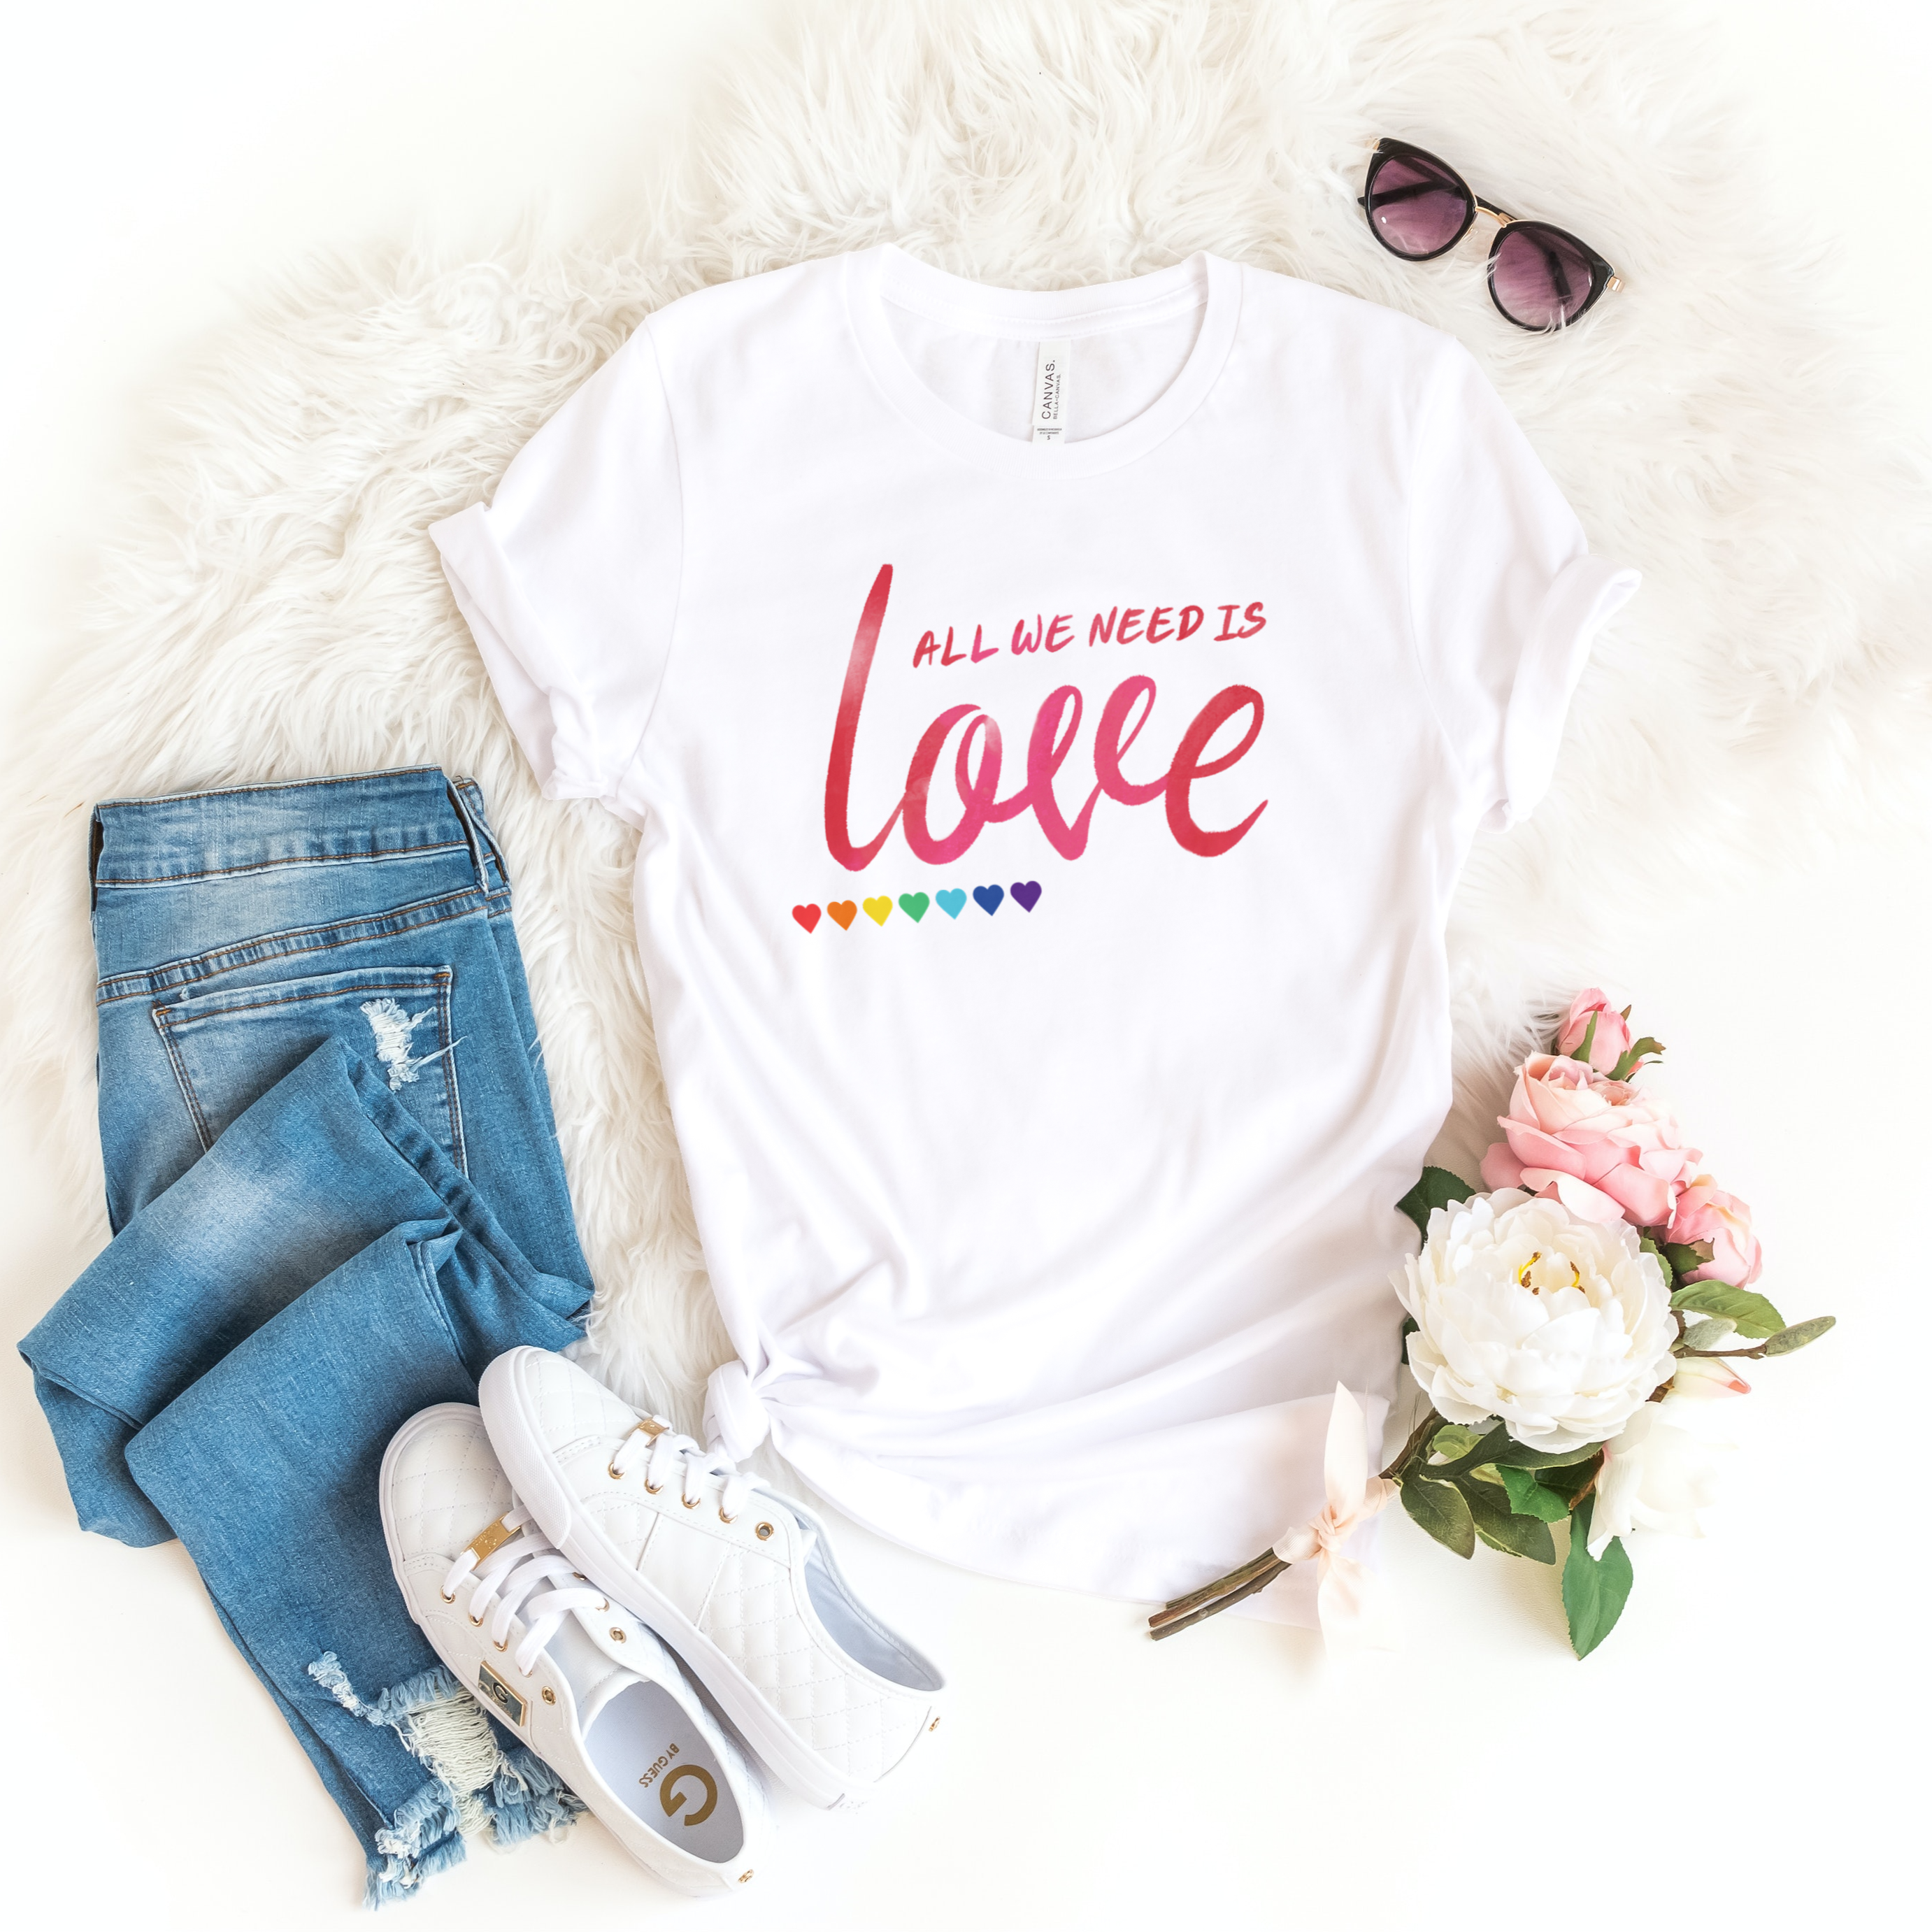 Story of Awakening Lifestyle Community Spirituality Relationships Love Light Meditation Oneness Earth Balance Healing Shop Store Charity Tree Nature Read Write T shirt Tops Tees Clothing Women Horoscope Organic All We Need Is Love LGBT Quote